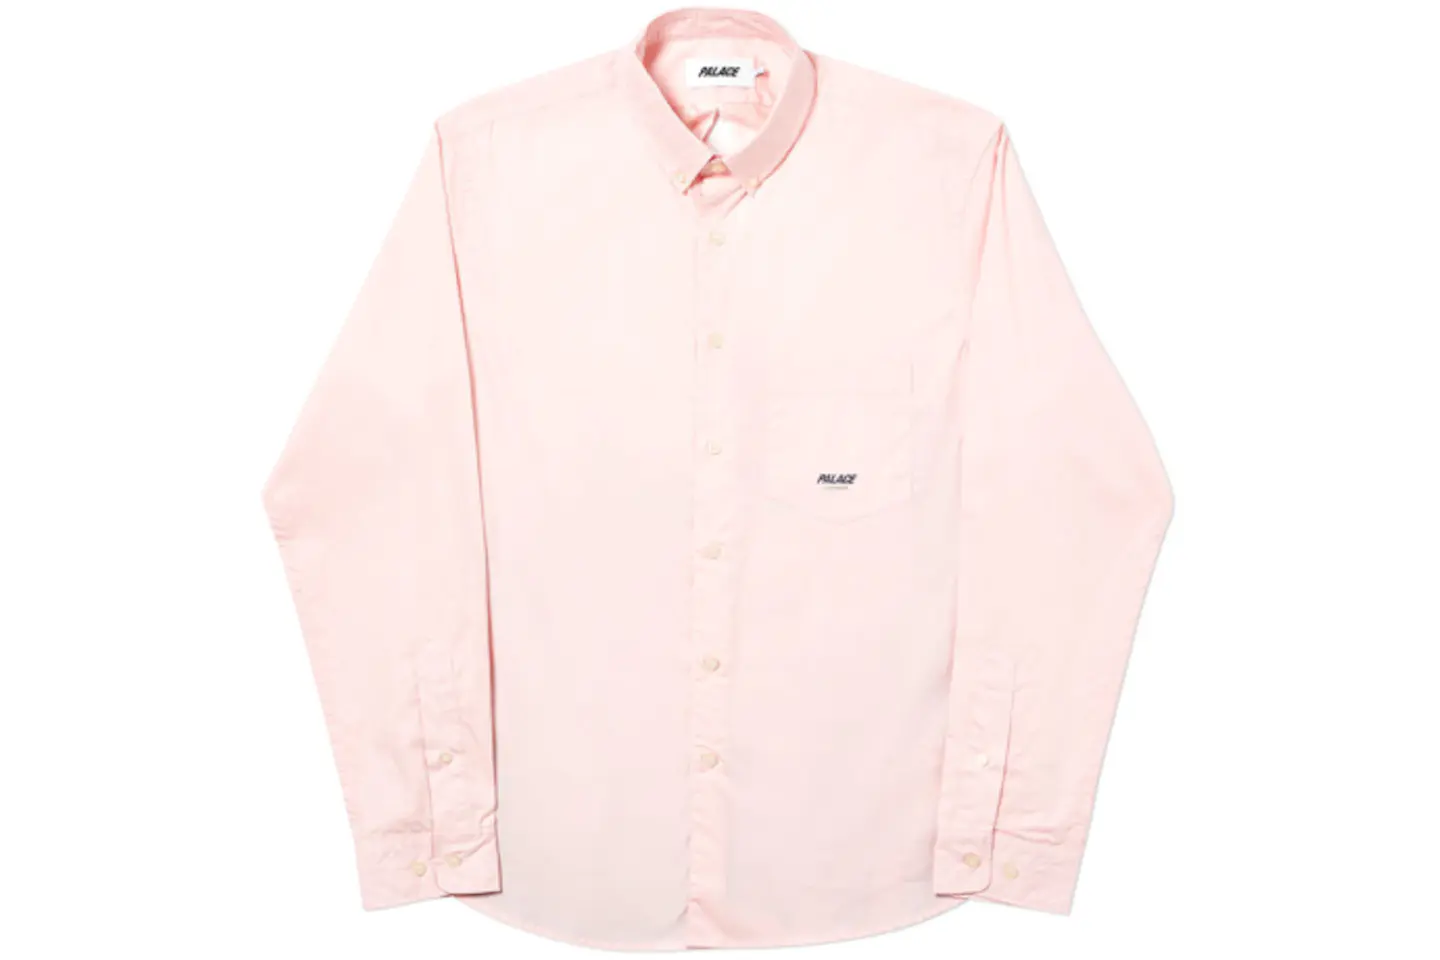 Palace Persailles Shirt Pink - FW19 Homme - FR